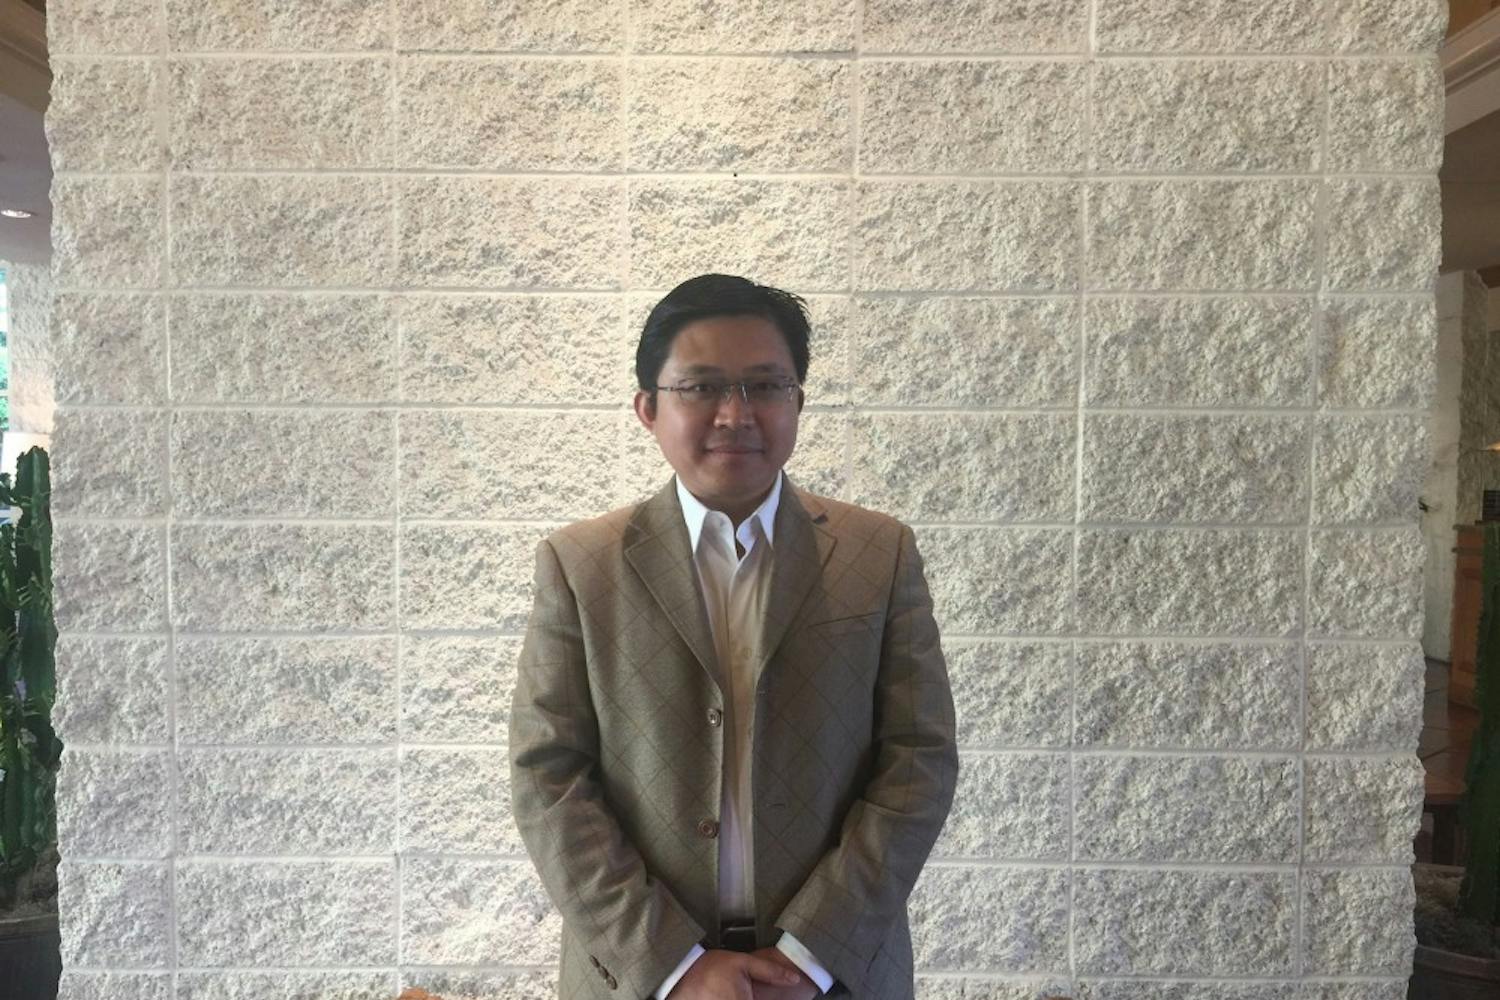 Dr. Tony Hu poses for a photo at Tempe Mission Palms on March 6, 2017